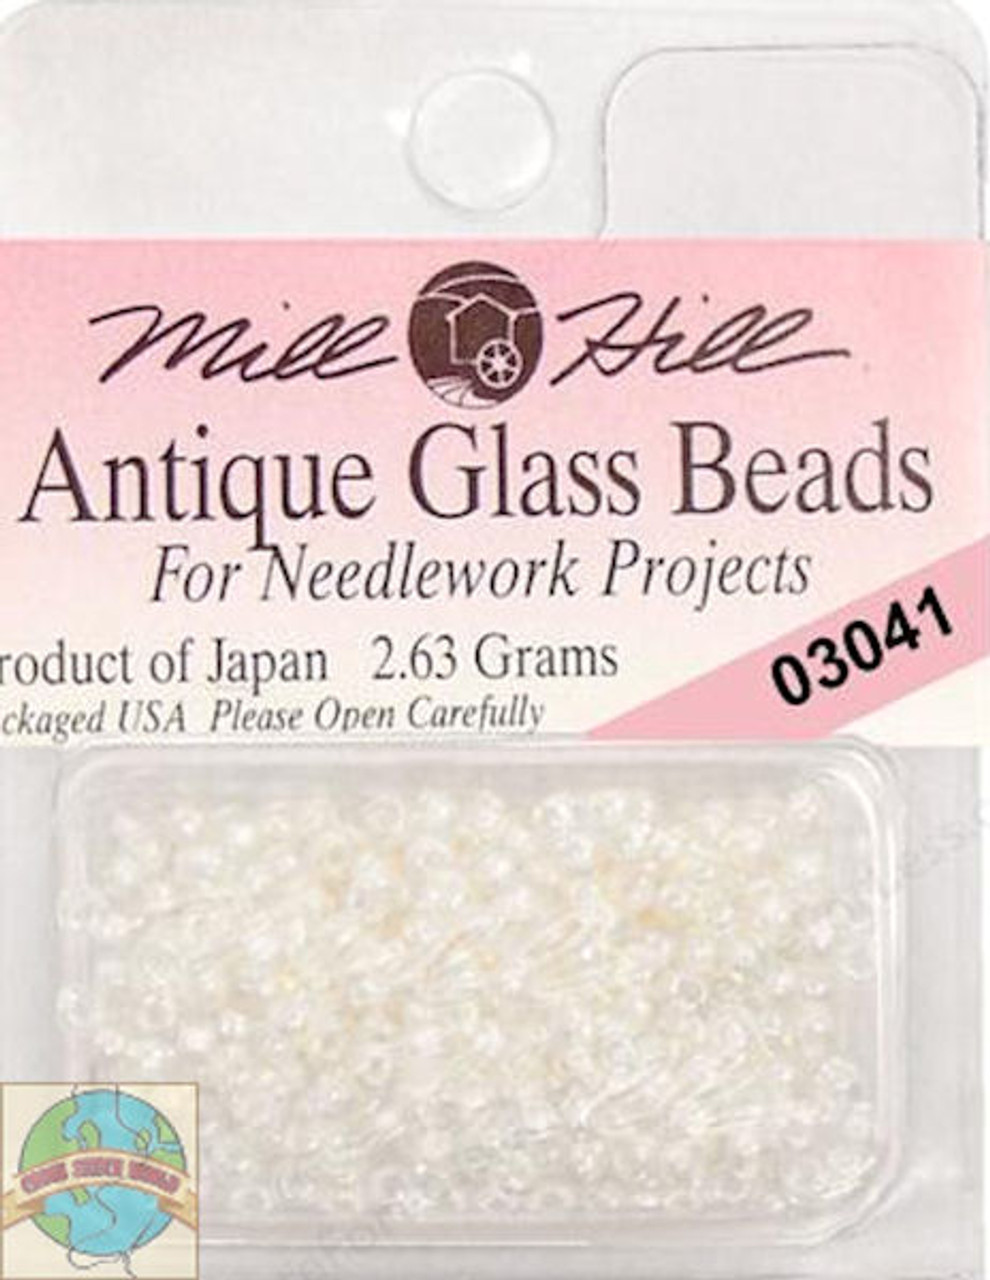 Mill Hill Antique Glass Beads 2.63g White Opal #03041